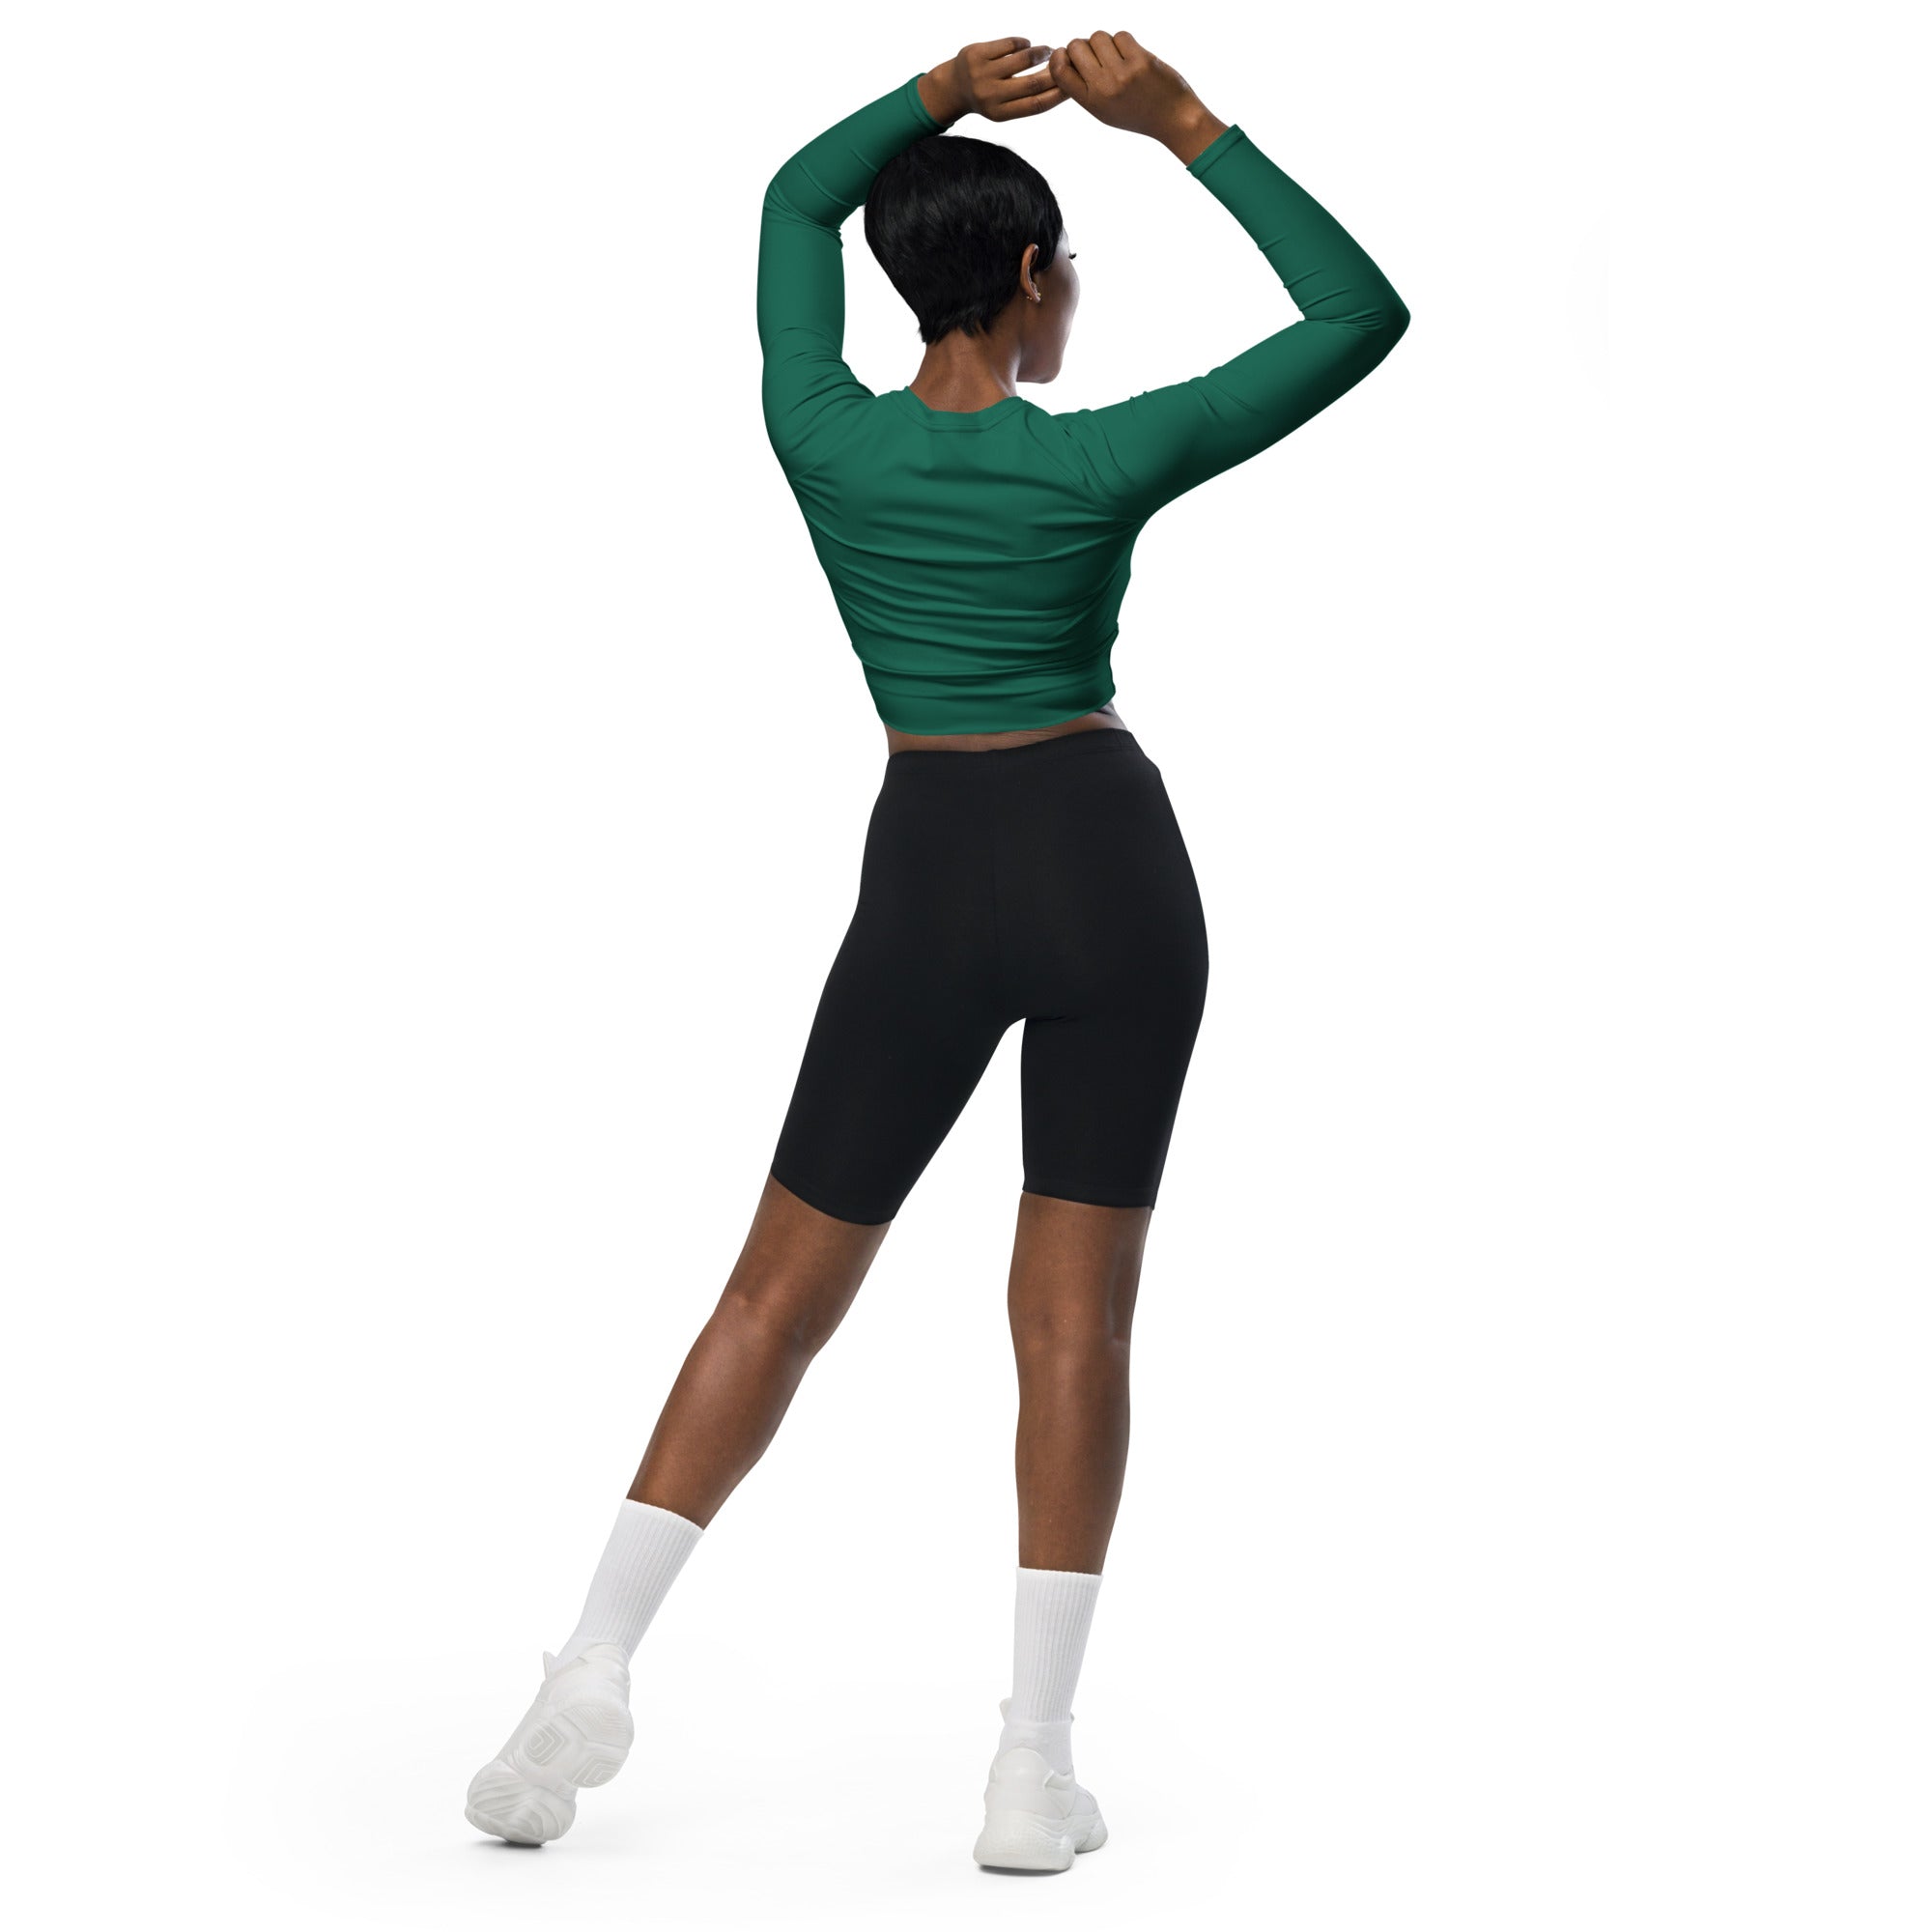 Emerald Green Recycled Long-sleeve Crop Top